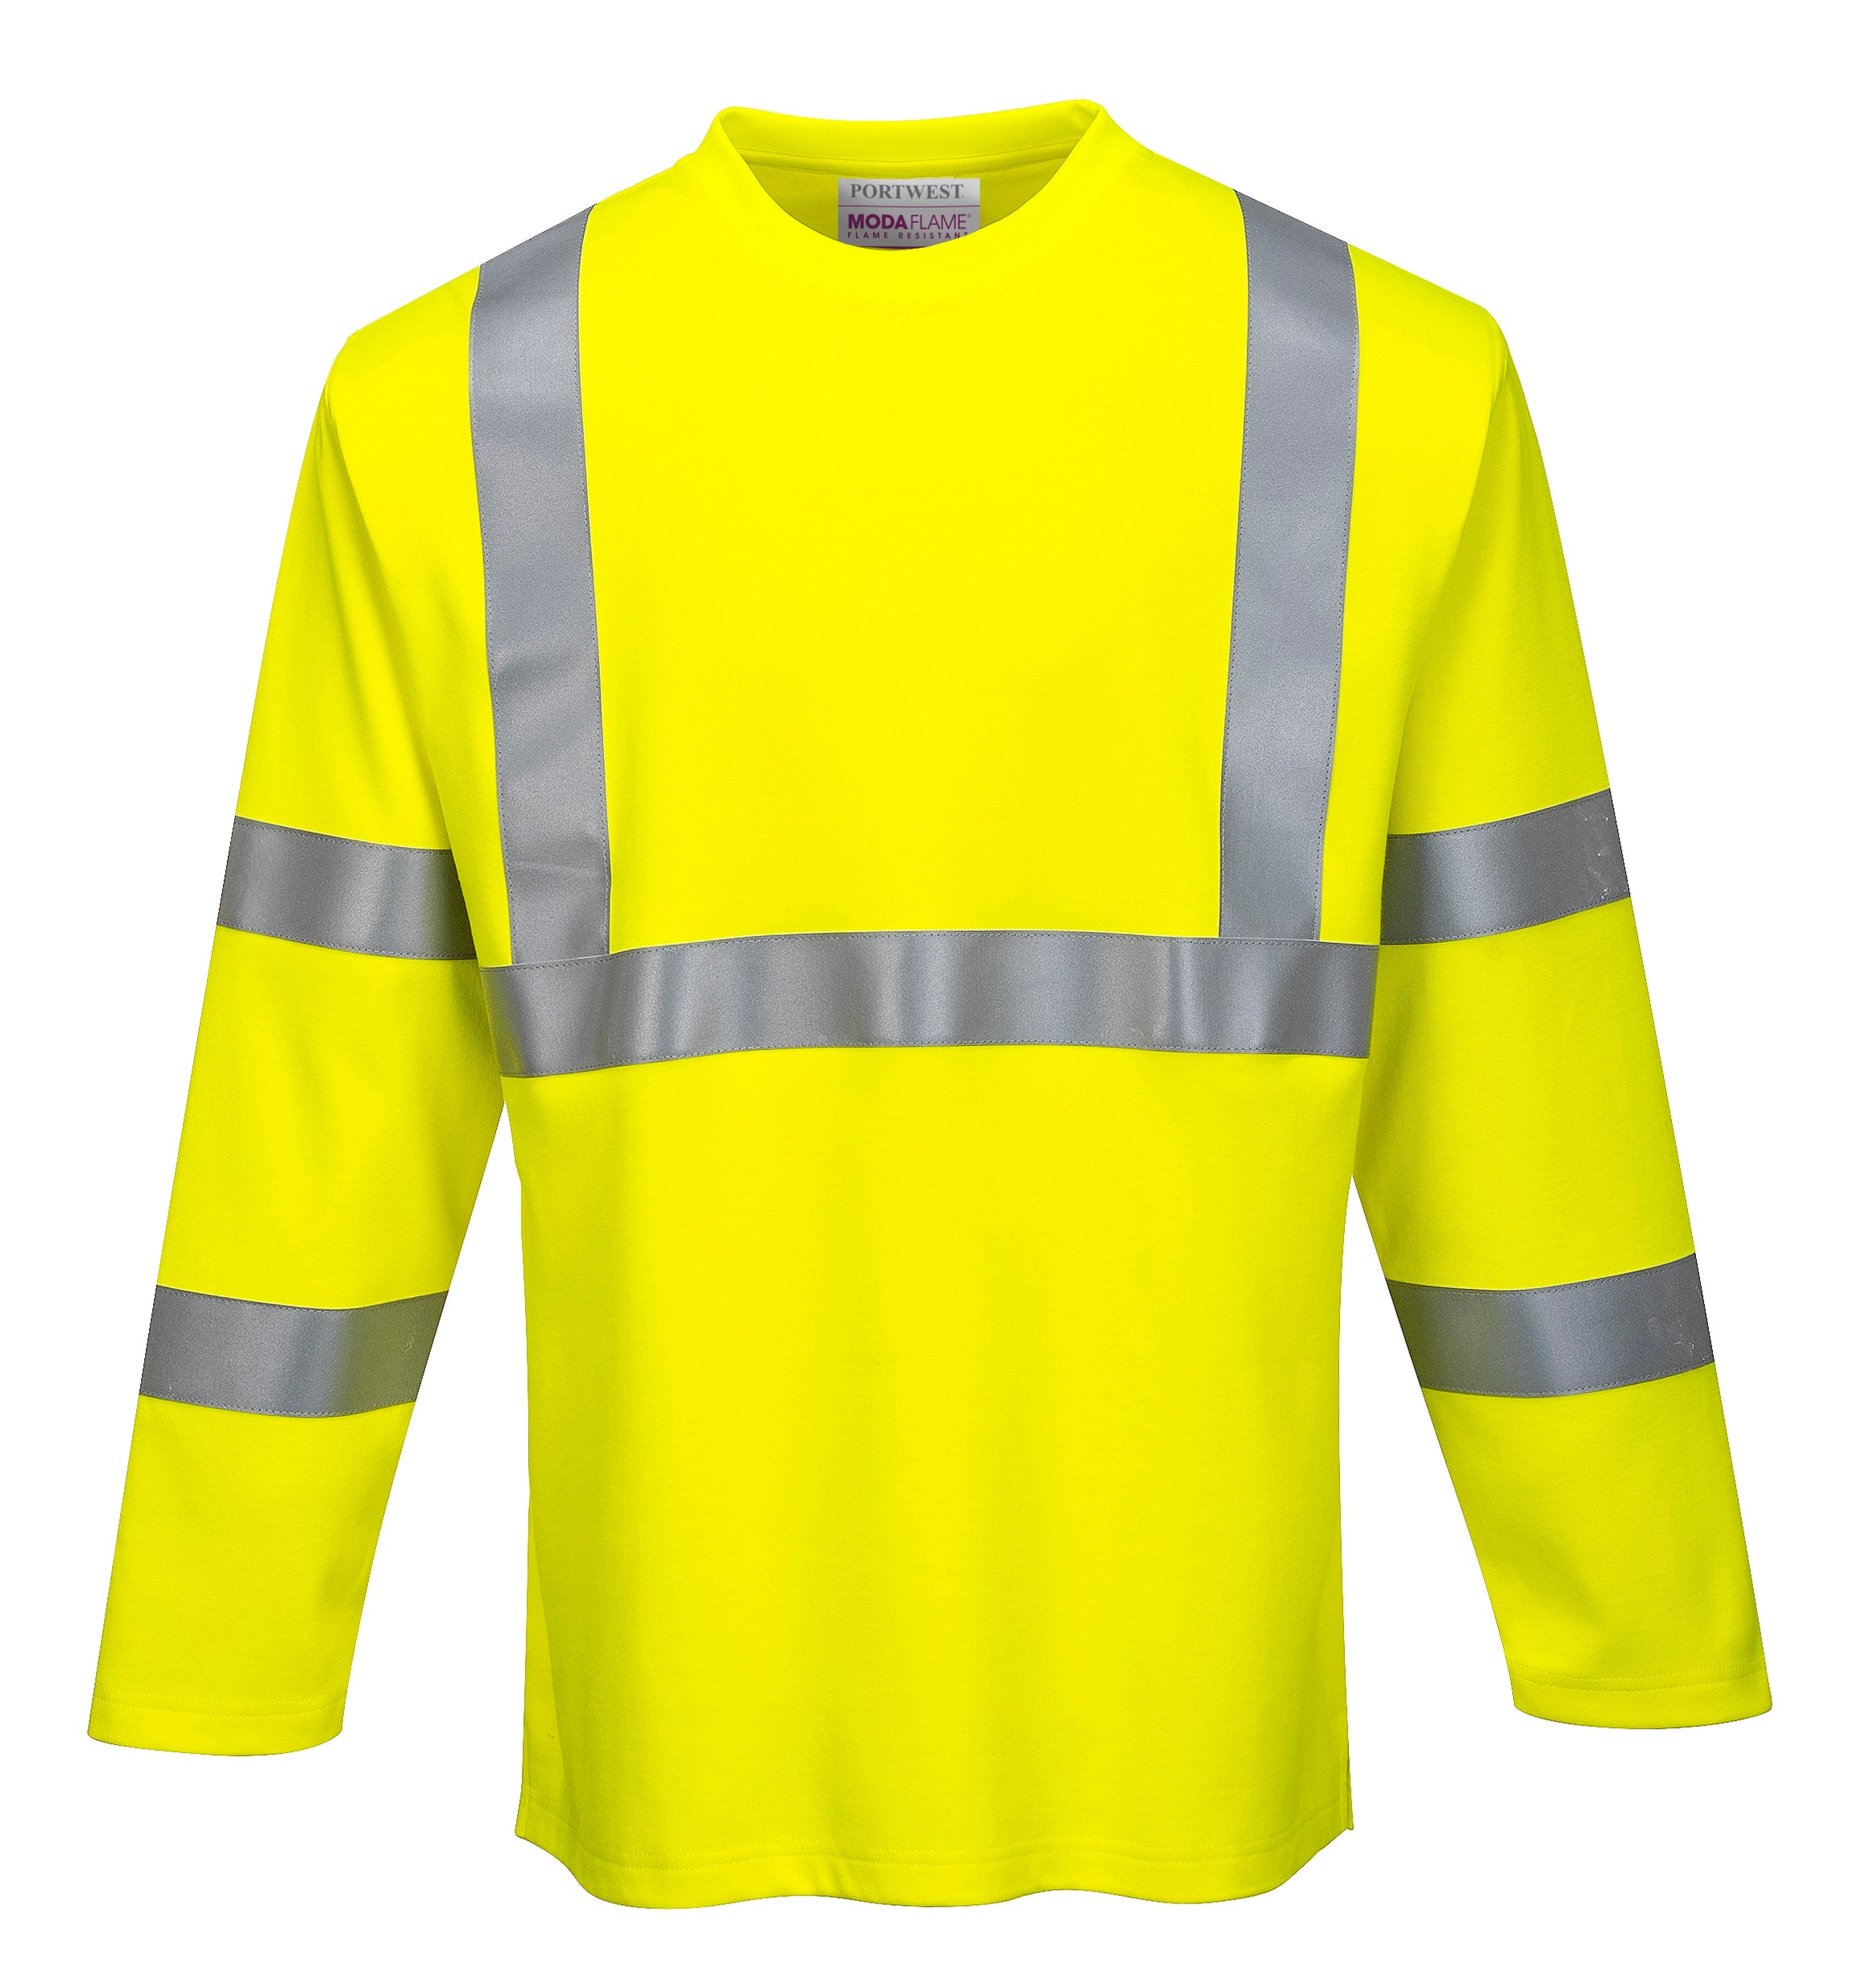 Flame Resistant Clothing | Fire Resistant Clothing | FR Coveralls ...